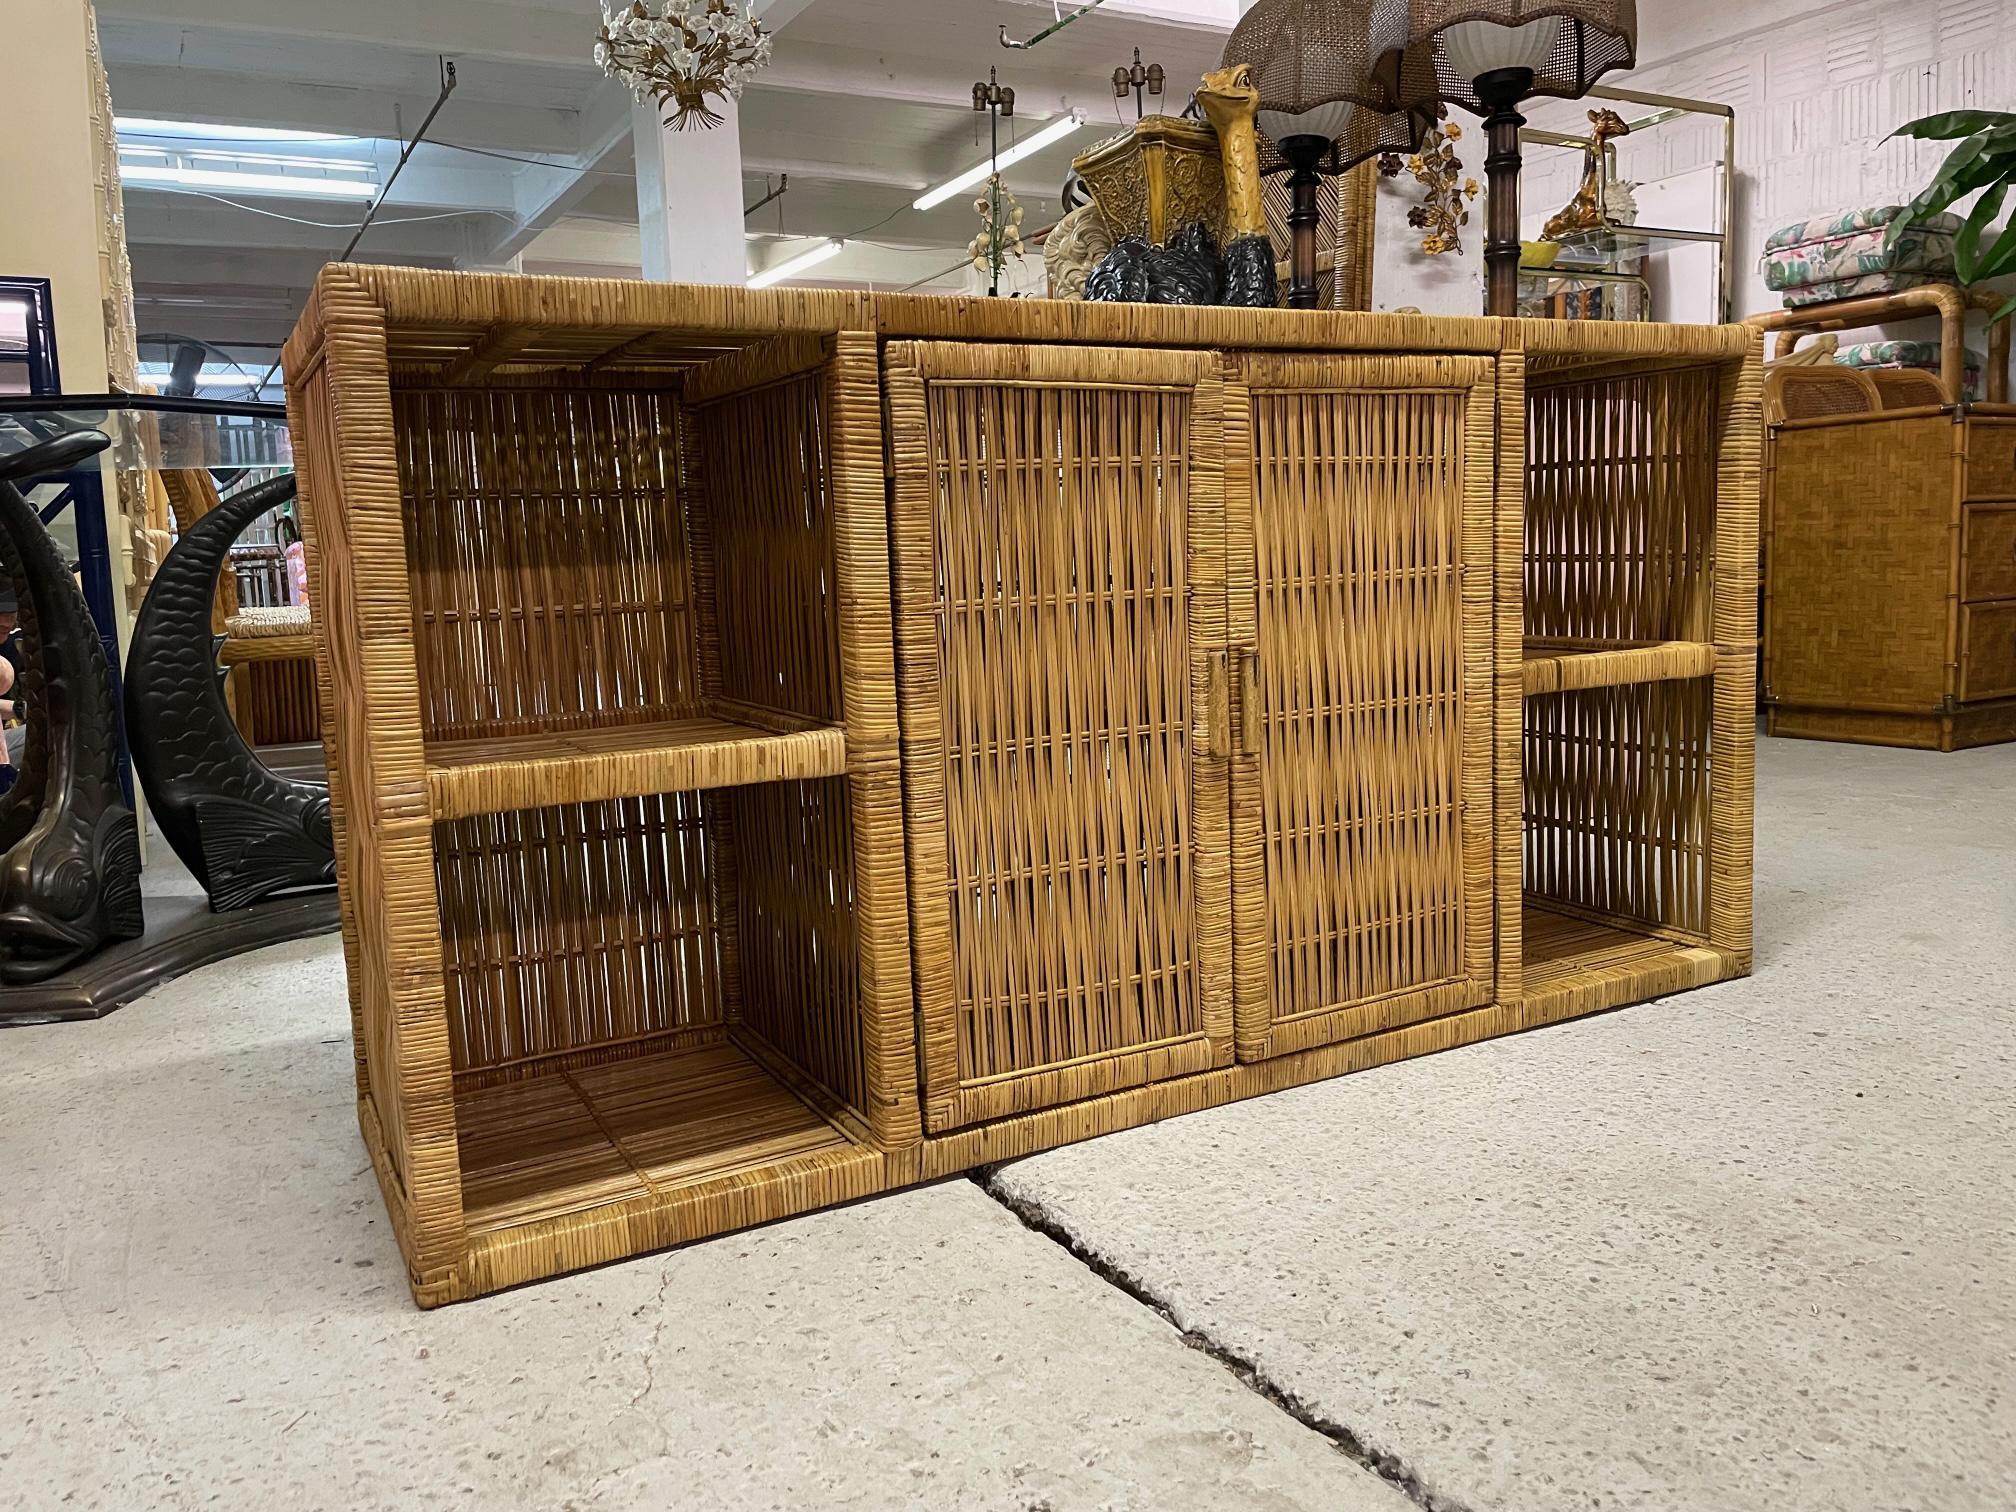 Vintage credenza or buffet feature a woven wicker design with double doors, shelving for display, and a smoked glass top. Good condition with imperfections consistent with age, see photos for condition details. 
For a shipping quote to your exact